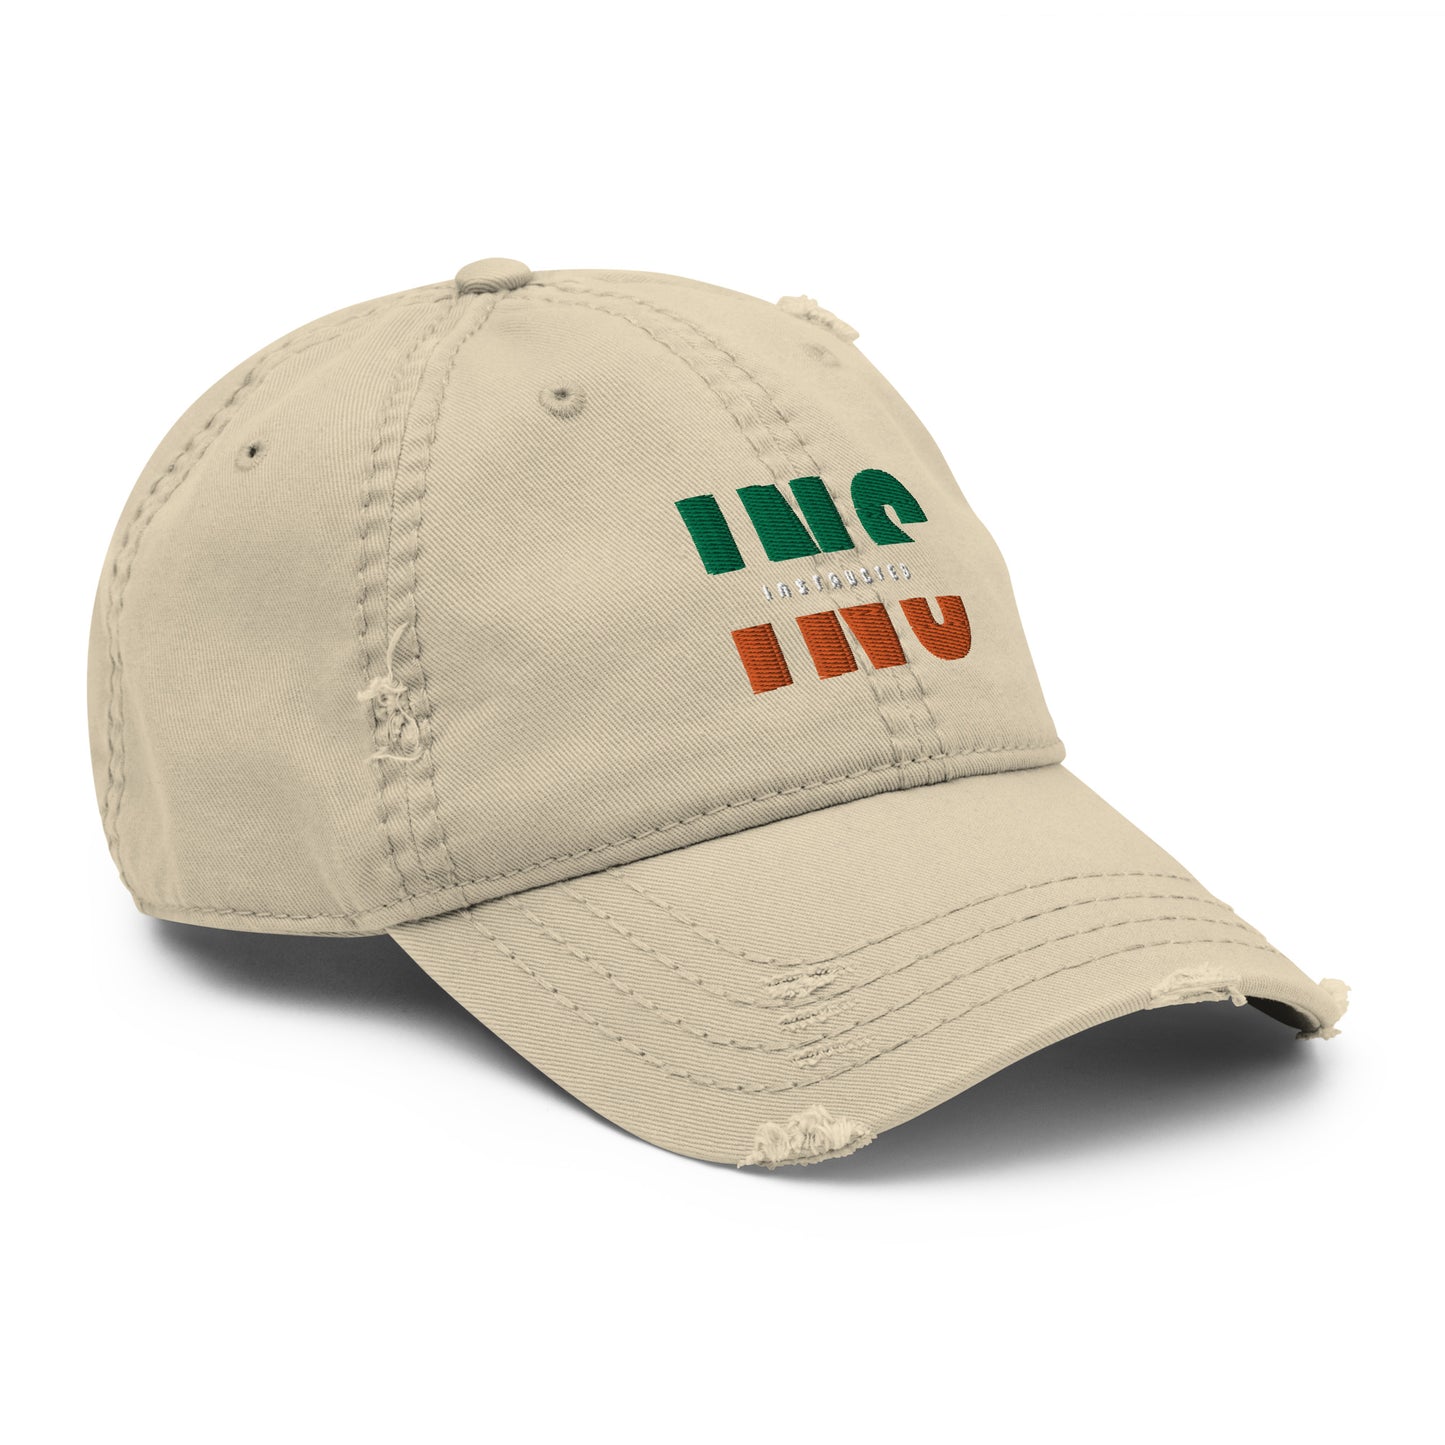 Instructed - Distressed Dad Hat